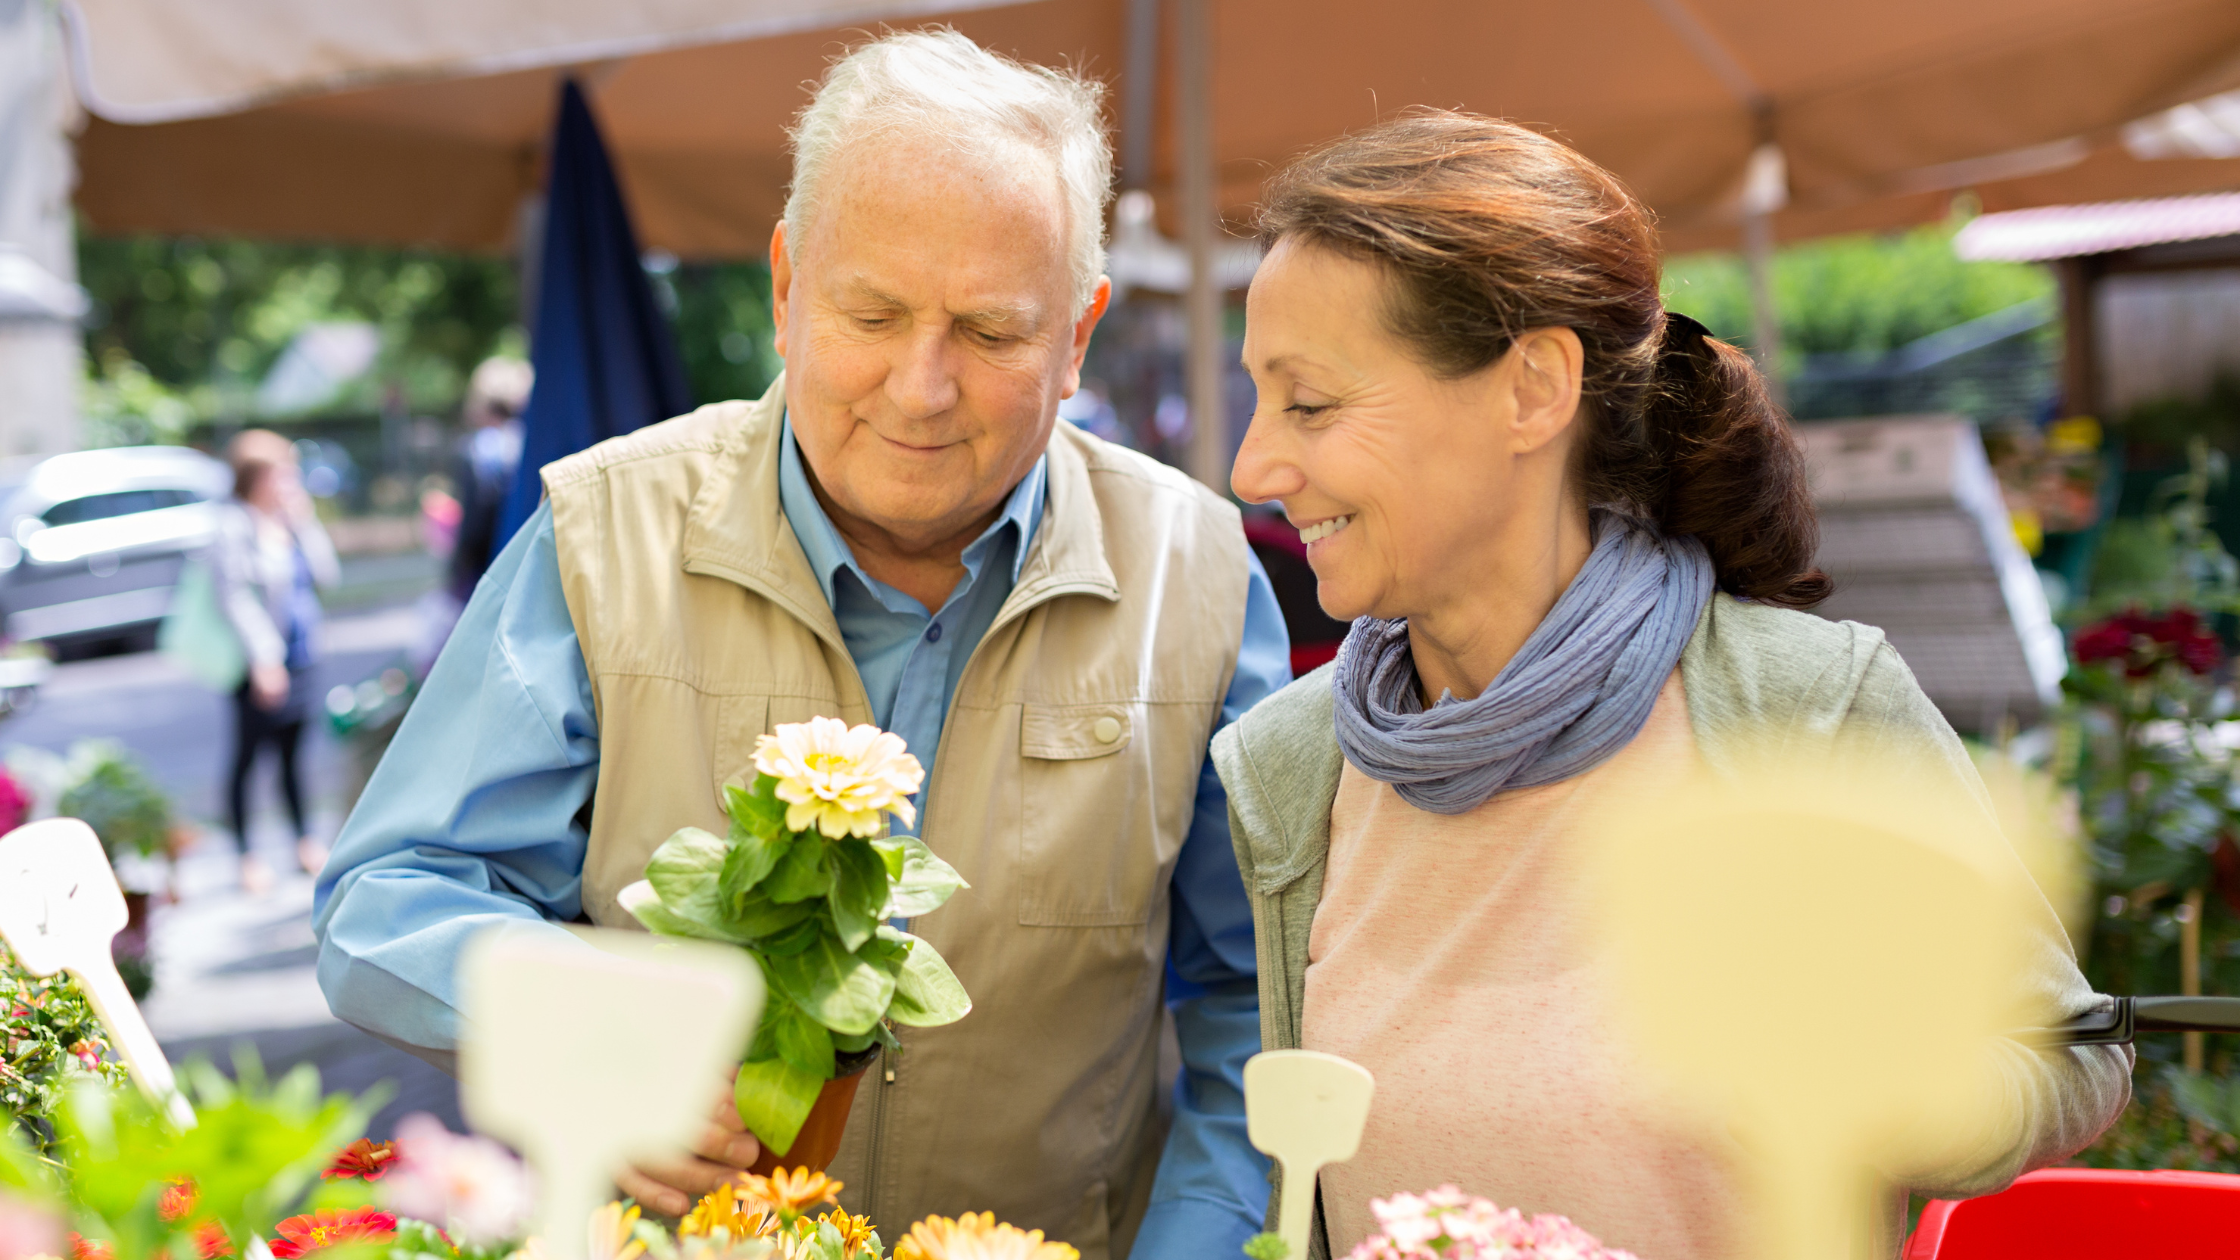 seniors at a farmer's market smiling at flowers